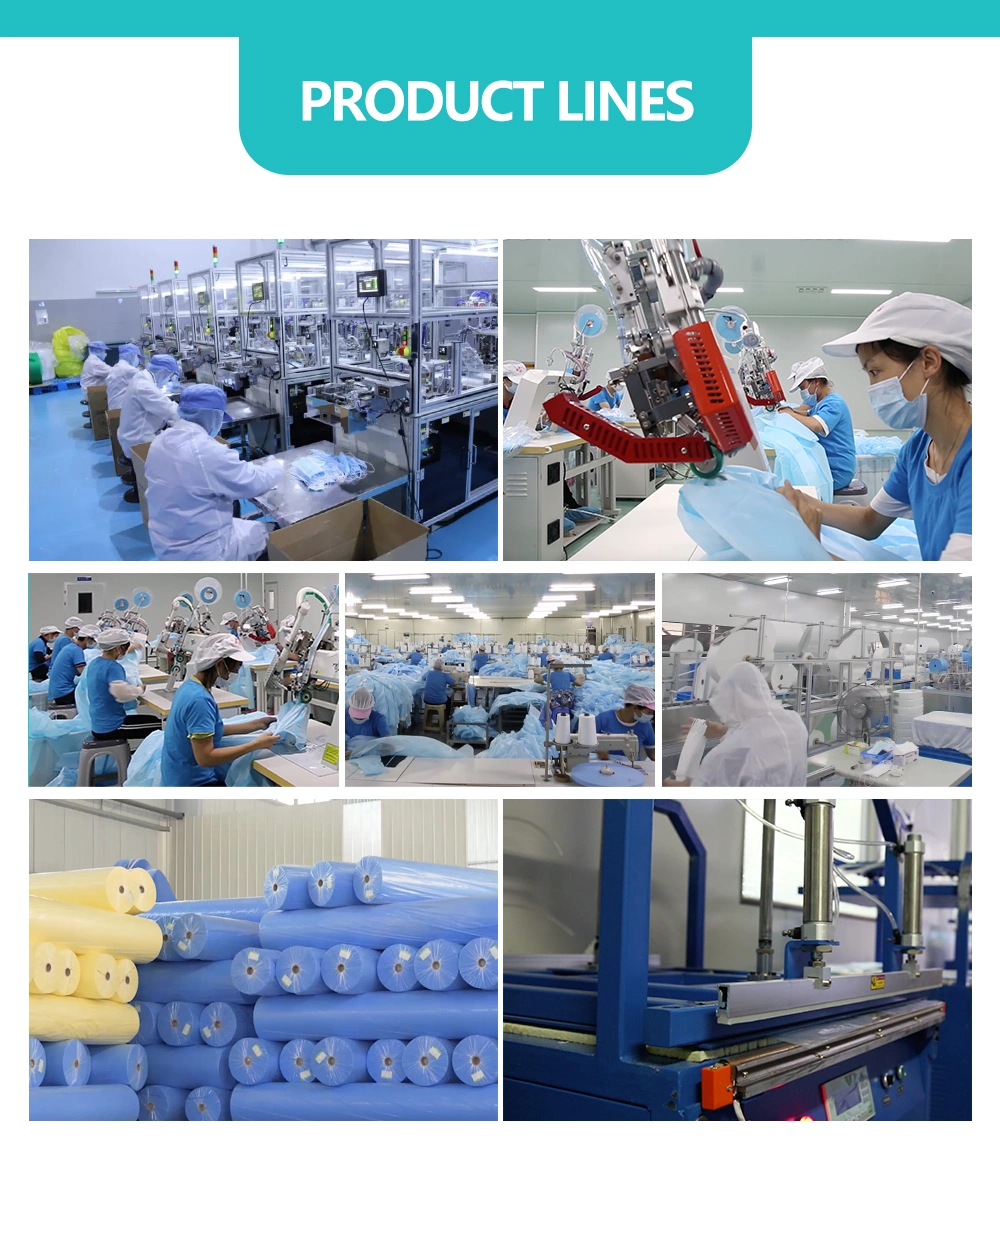 Disposable Nonwoven Coverall with Hood/ Disposable Protective Coverall/ Disposable Jumpsuit with Hood